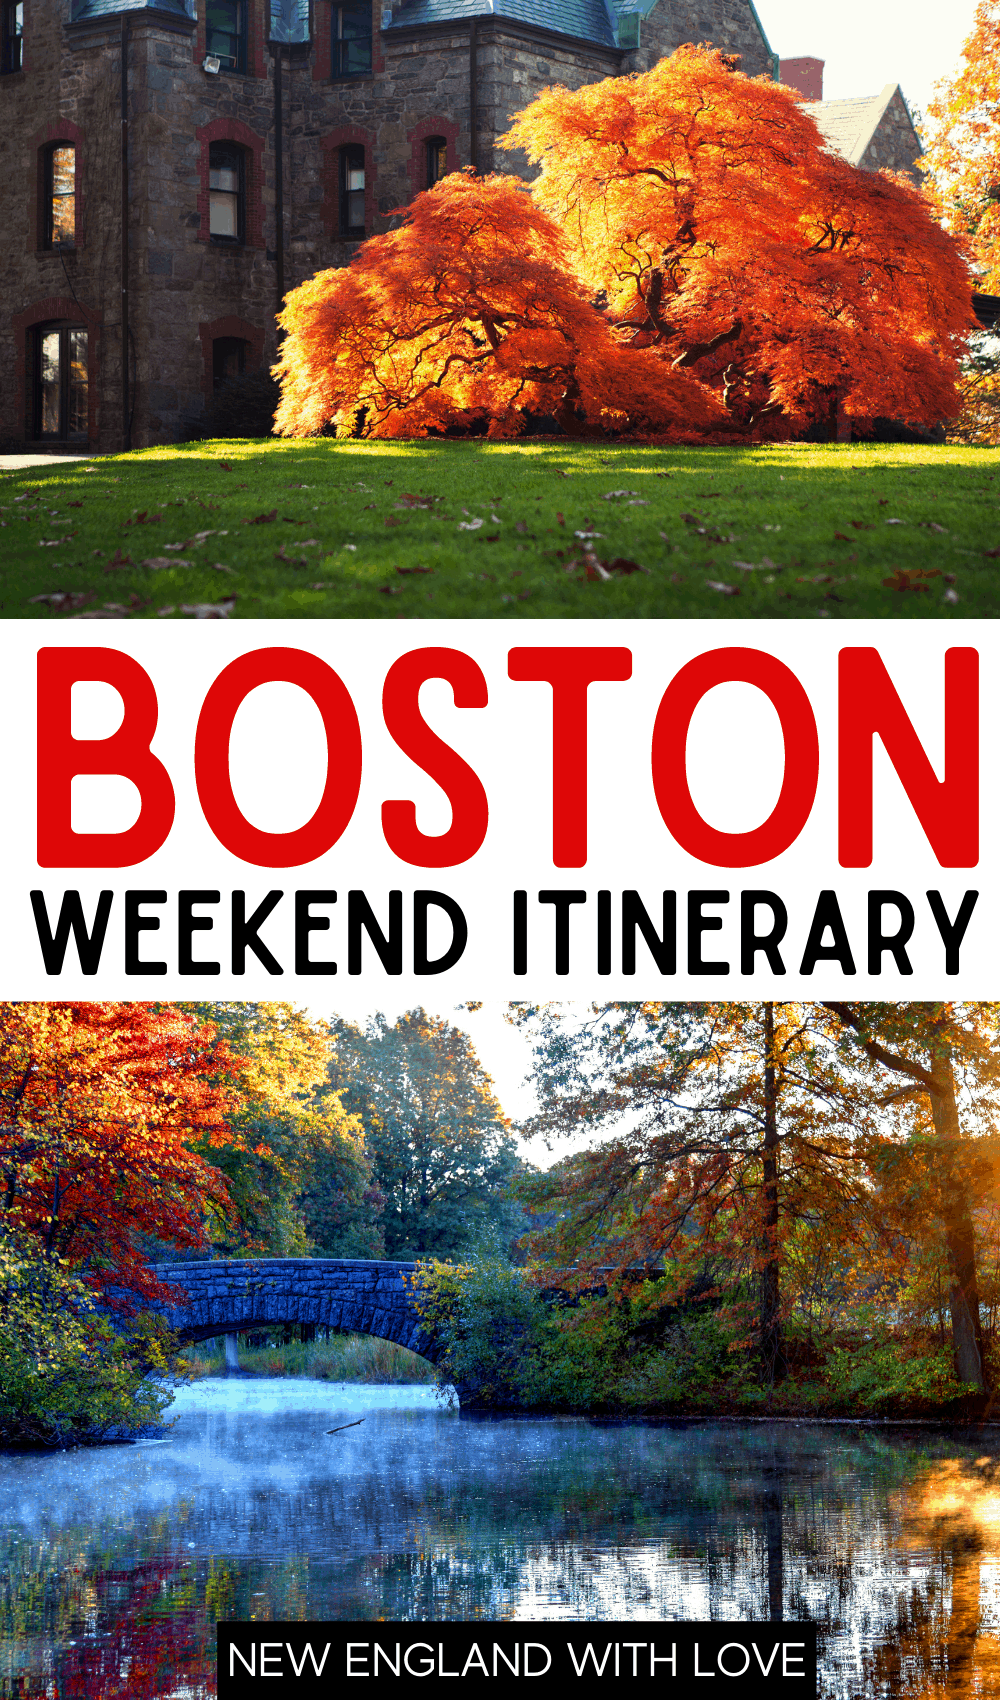 Pinterest graphic reading "BOSTON WEEKEND ITINERARY"